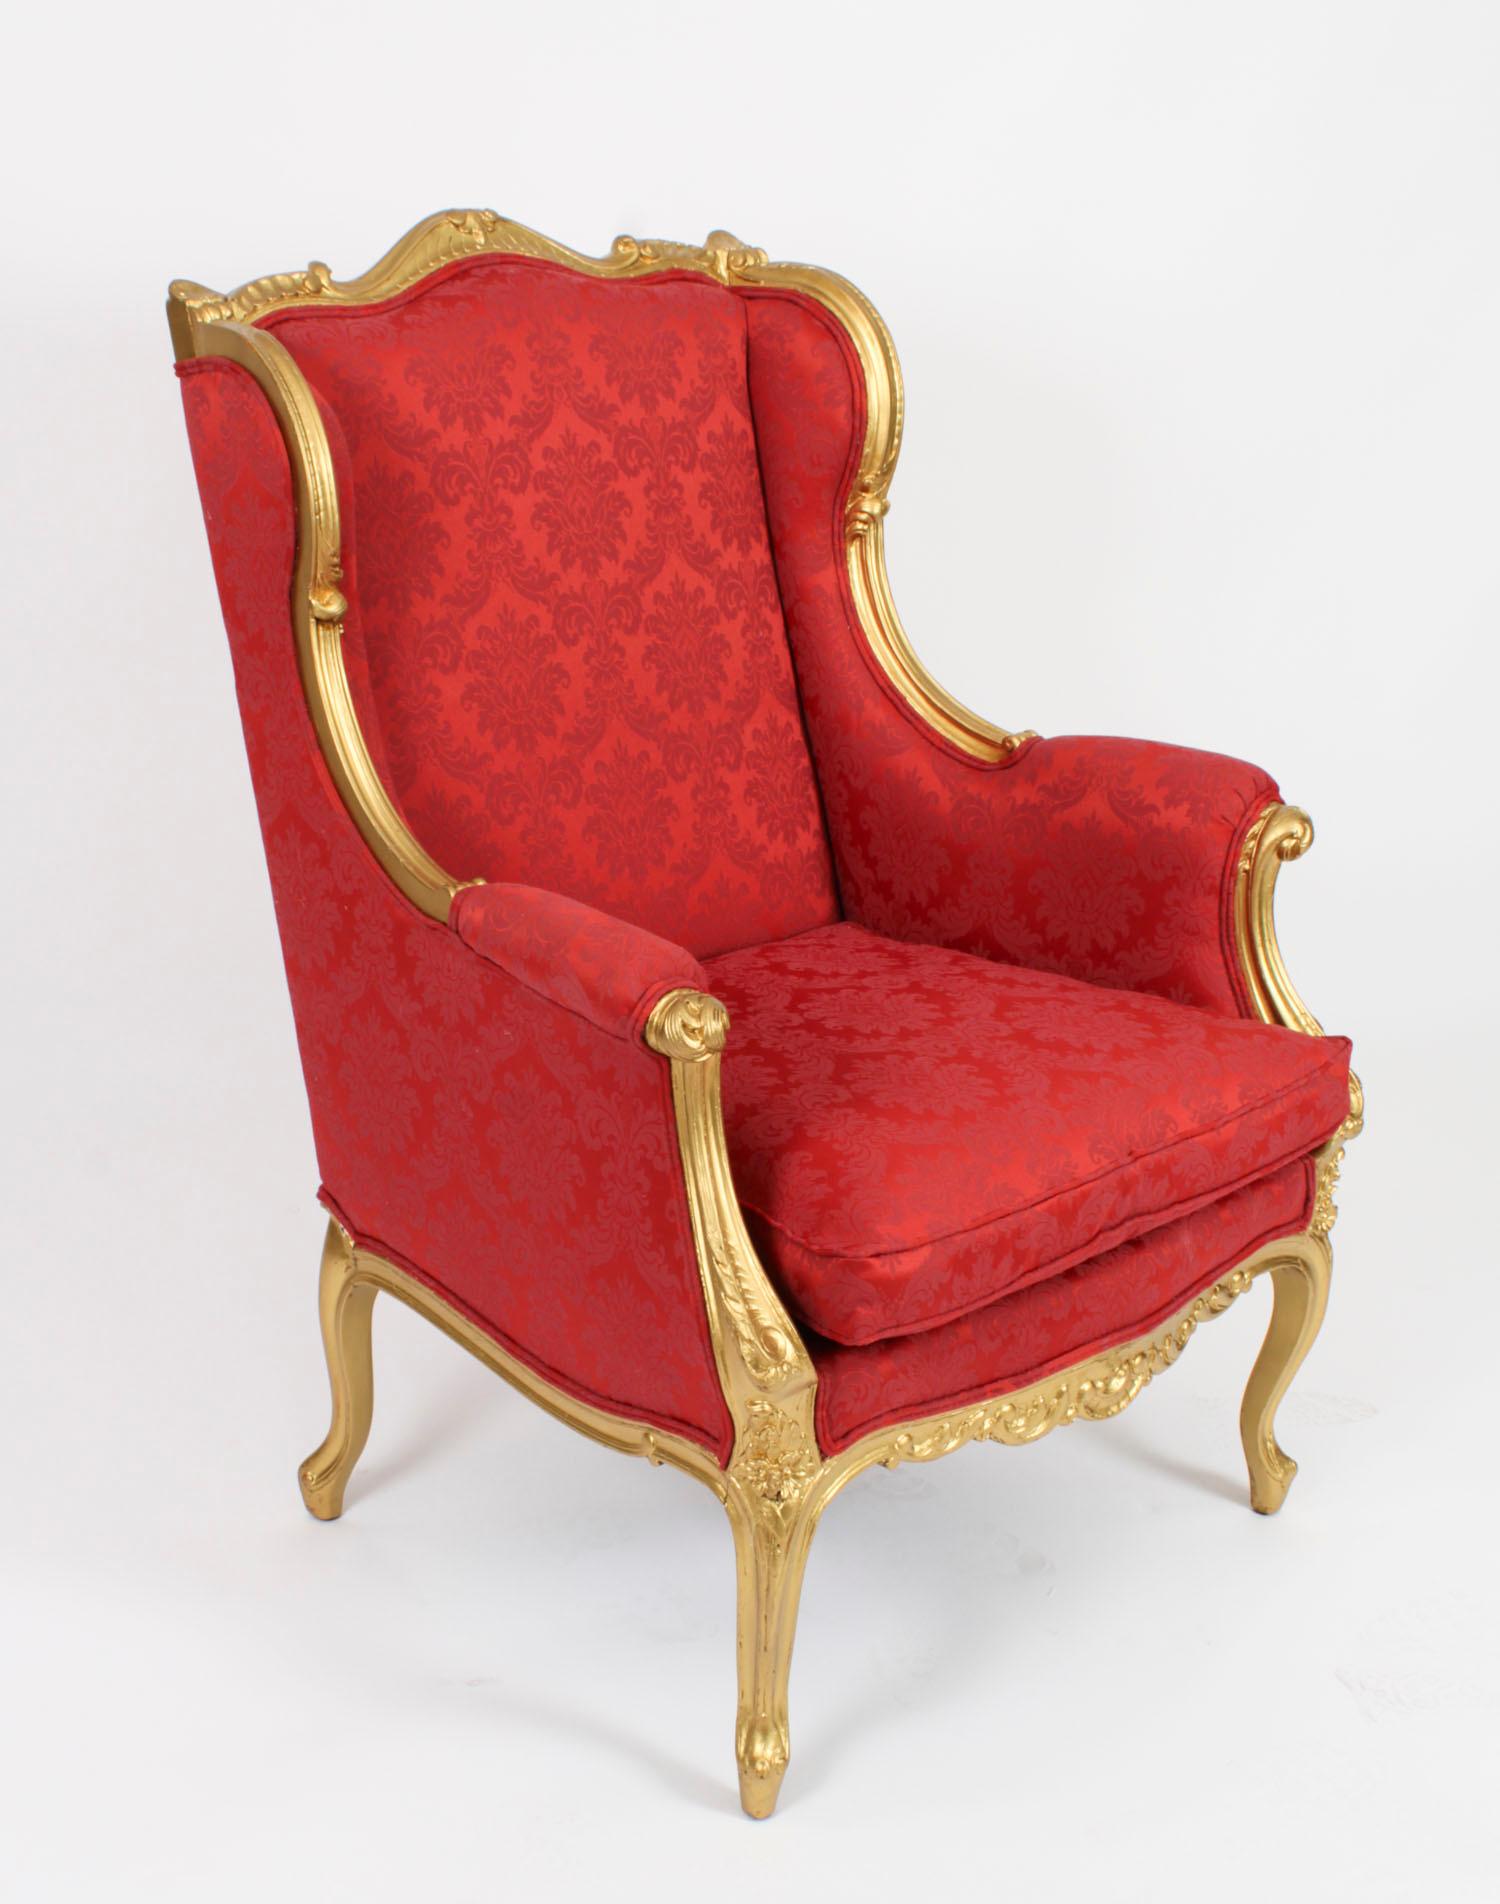 Antique Louis XV Revival Giltwood Shaped Bergere Armchair, 19th Century For Sale 13